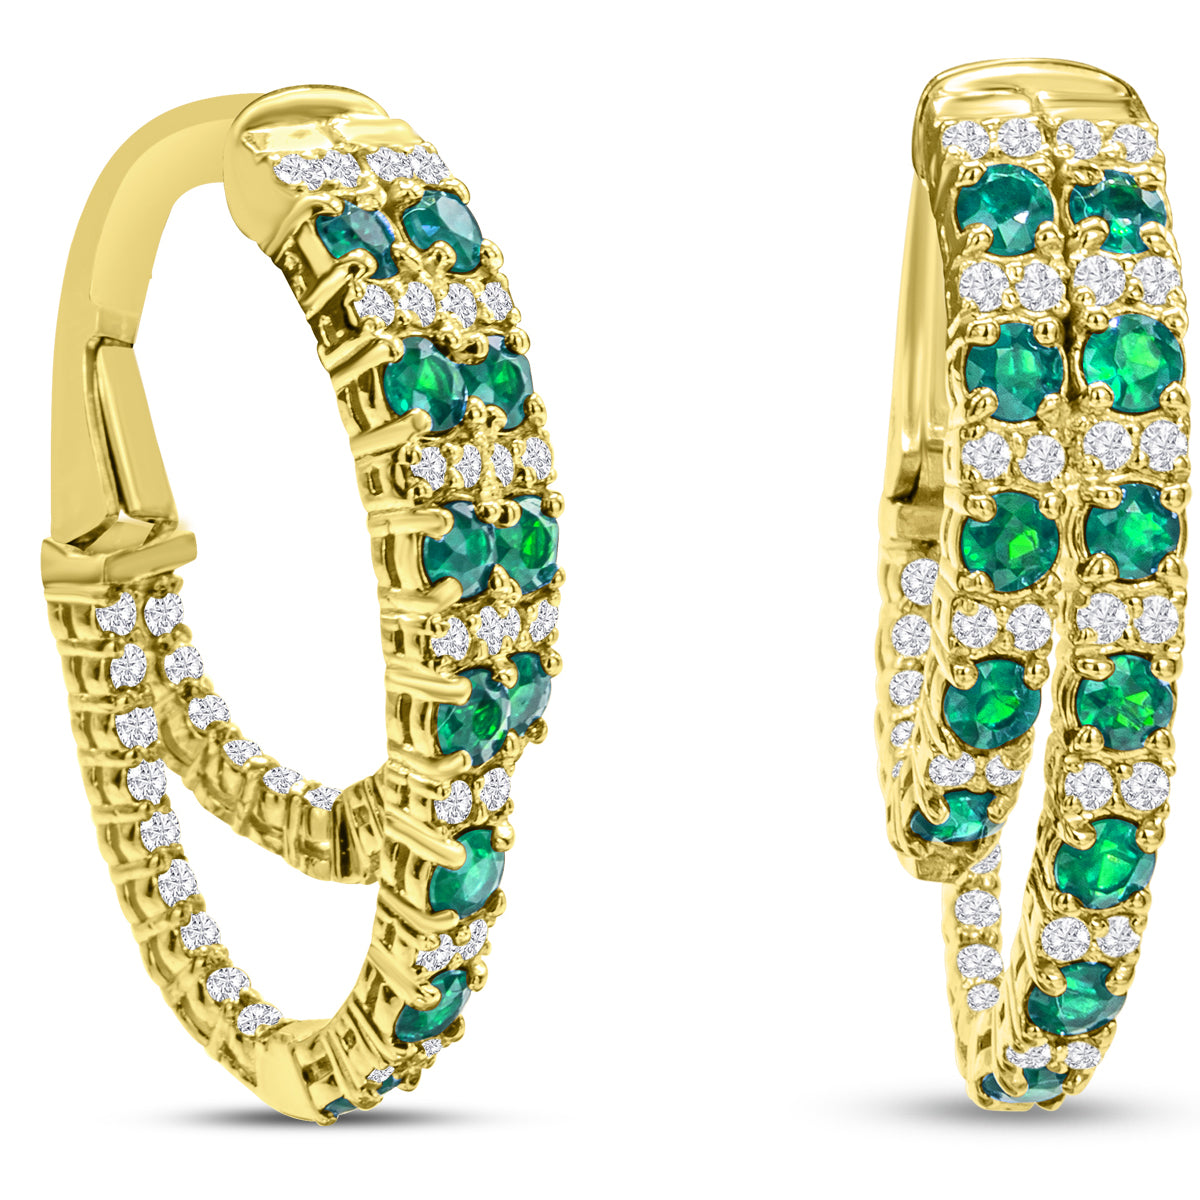 Sselects 2 1/2 Carat Emerald And Diamond Hoop Earrings In 14 Karat Yellow I-j, I1-i2 In Gold